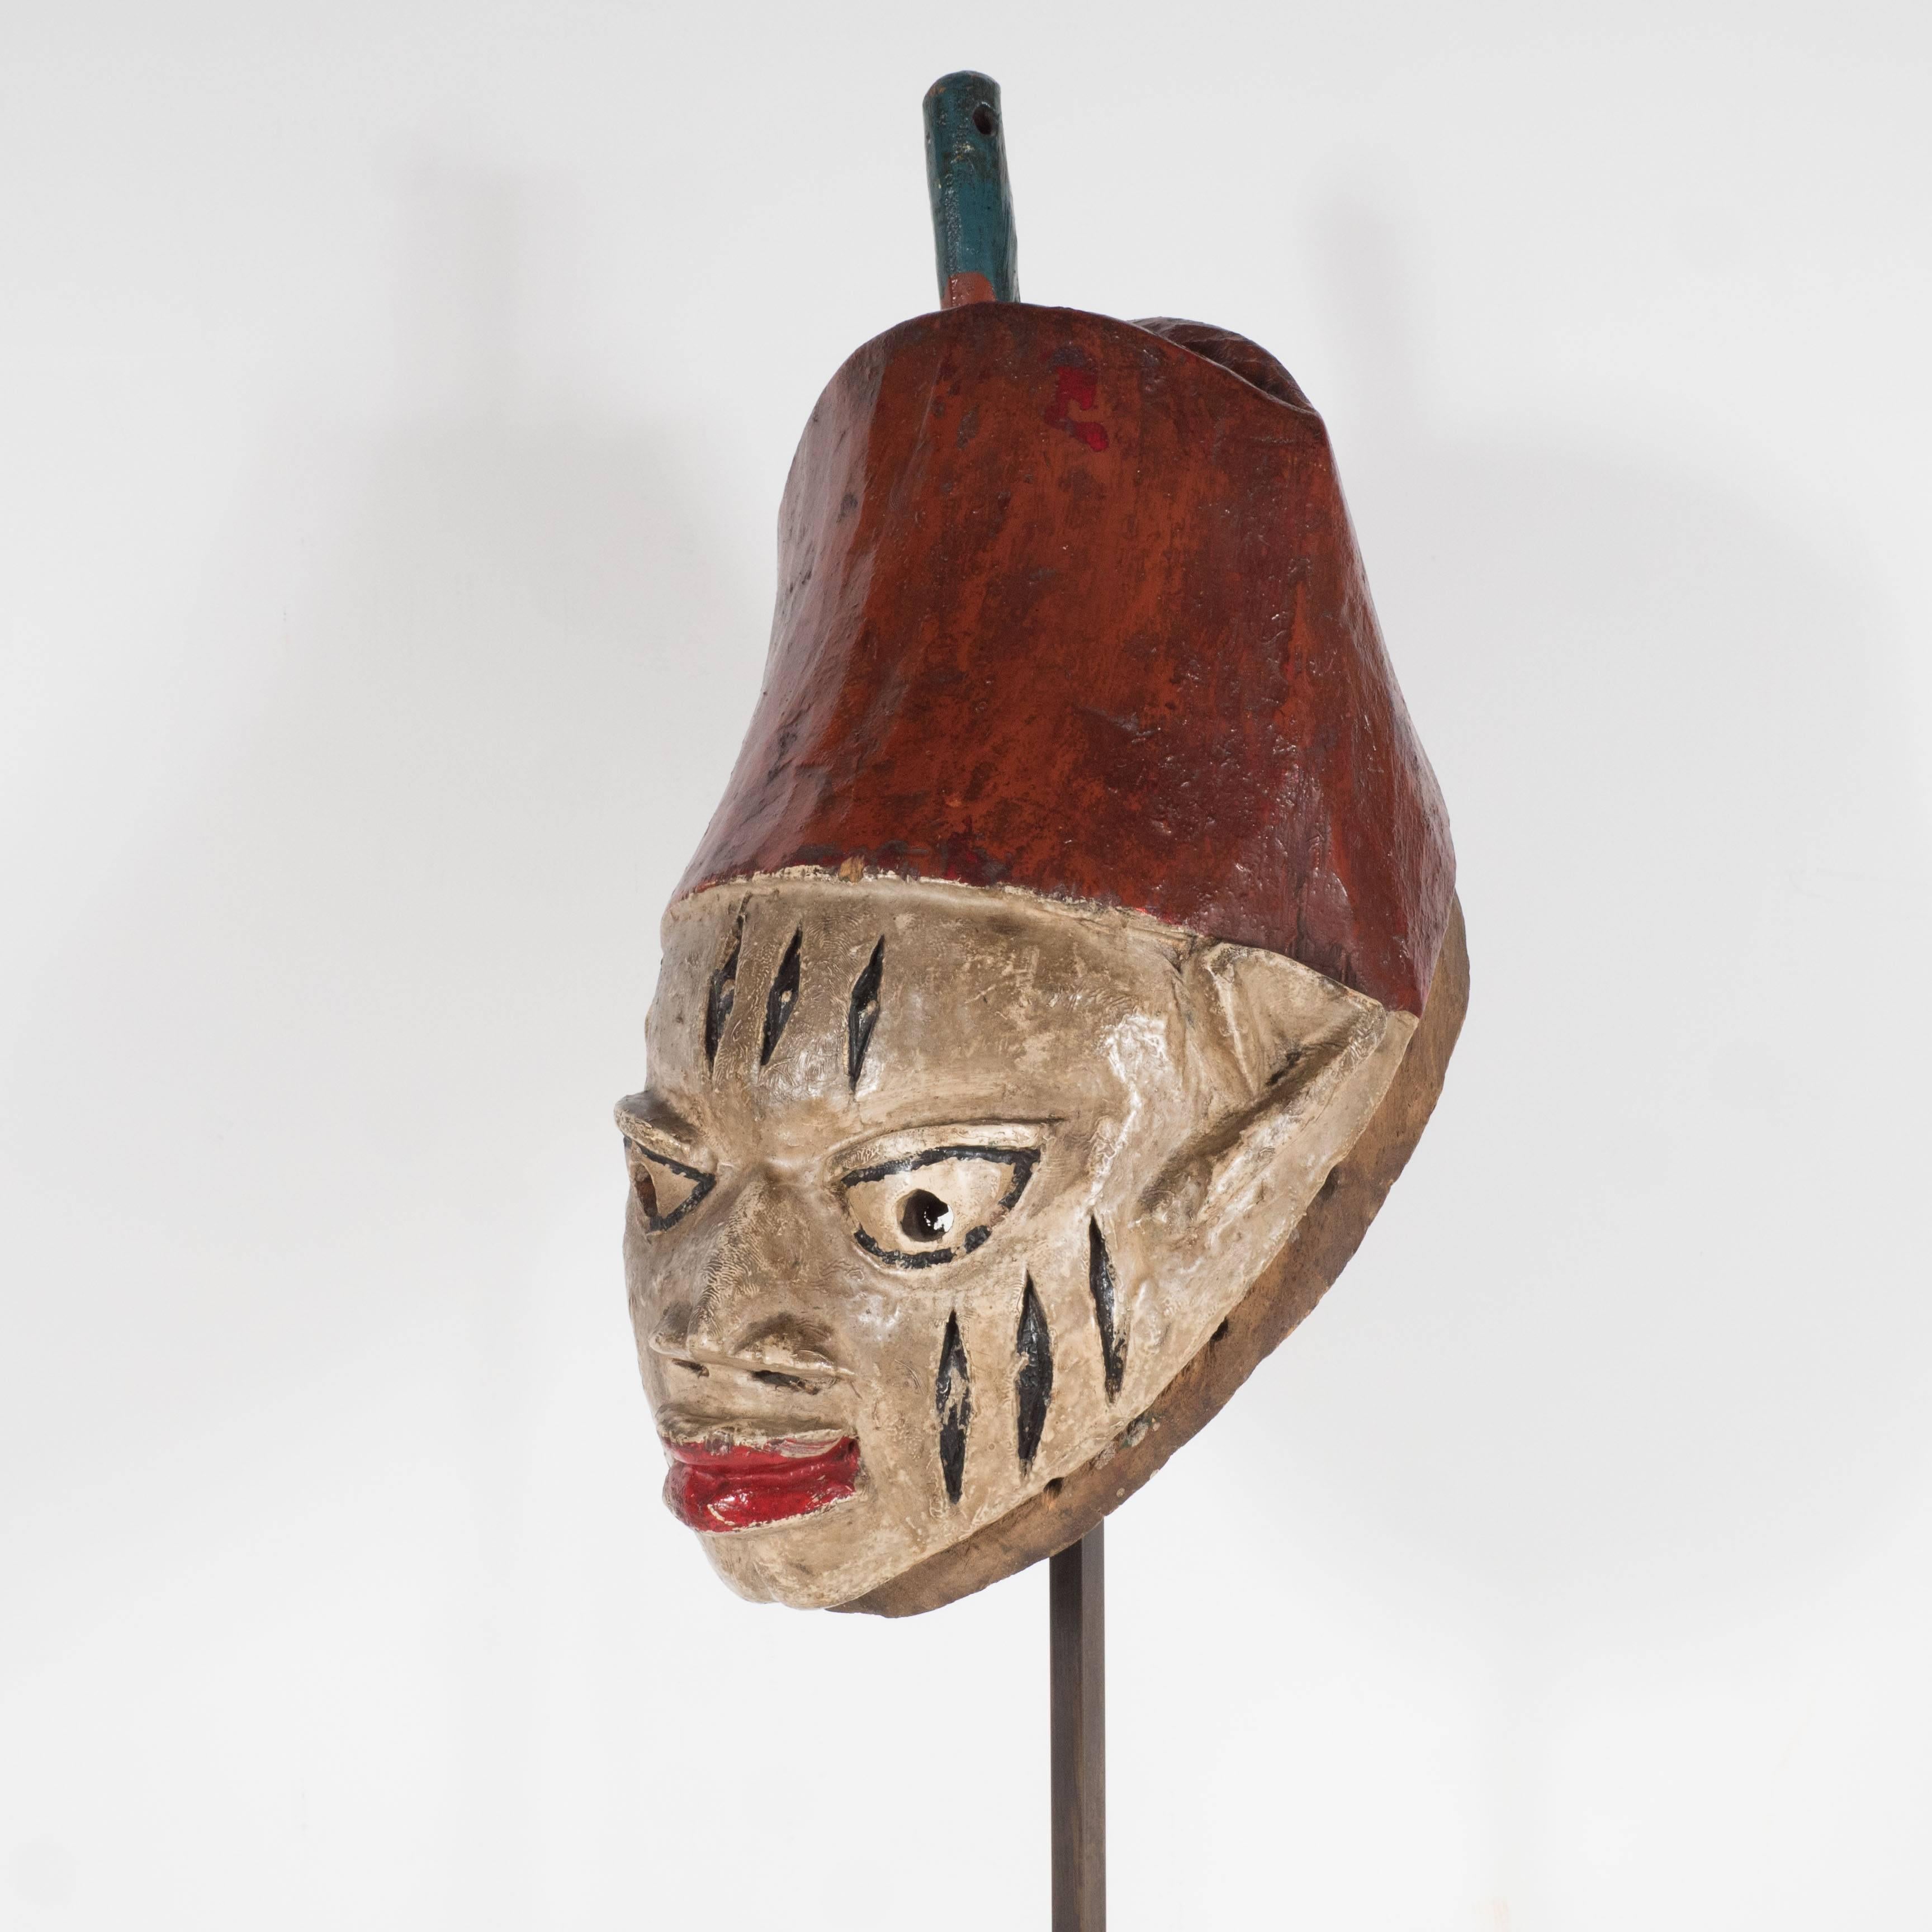 A painted head crest mask which appears to be from a 'Gelede cult,' known for honoring women and fertility, in the state of Benin (formerly Dahomey) in Nigeria, 20th century. This piece features vertical gash detailing on both cheeks and forehead. A